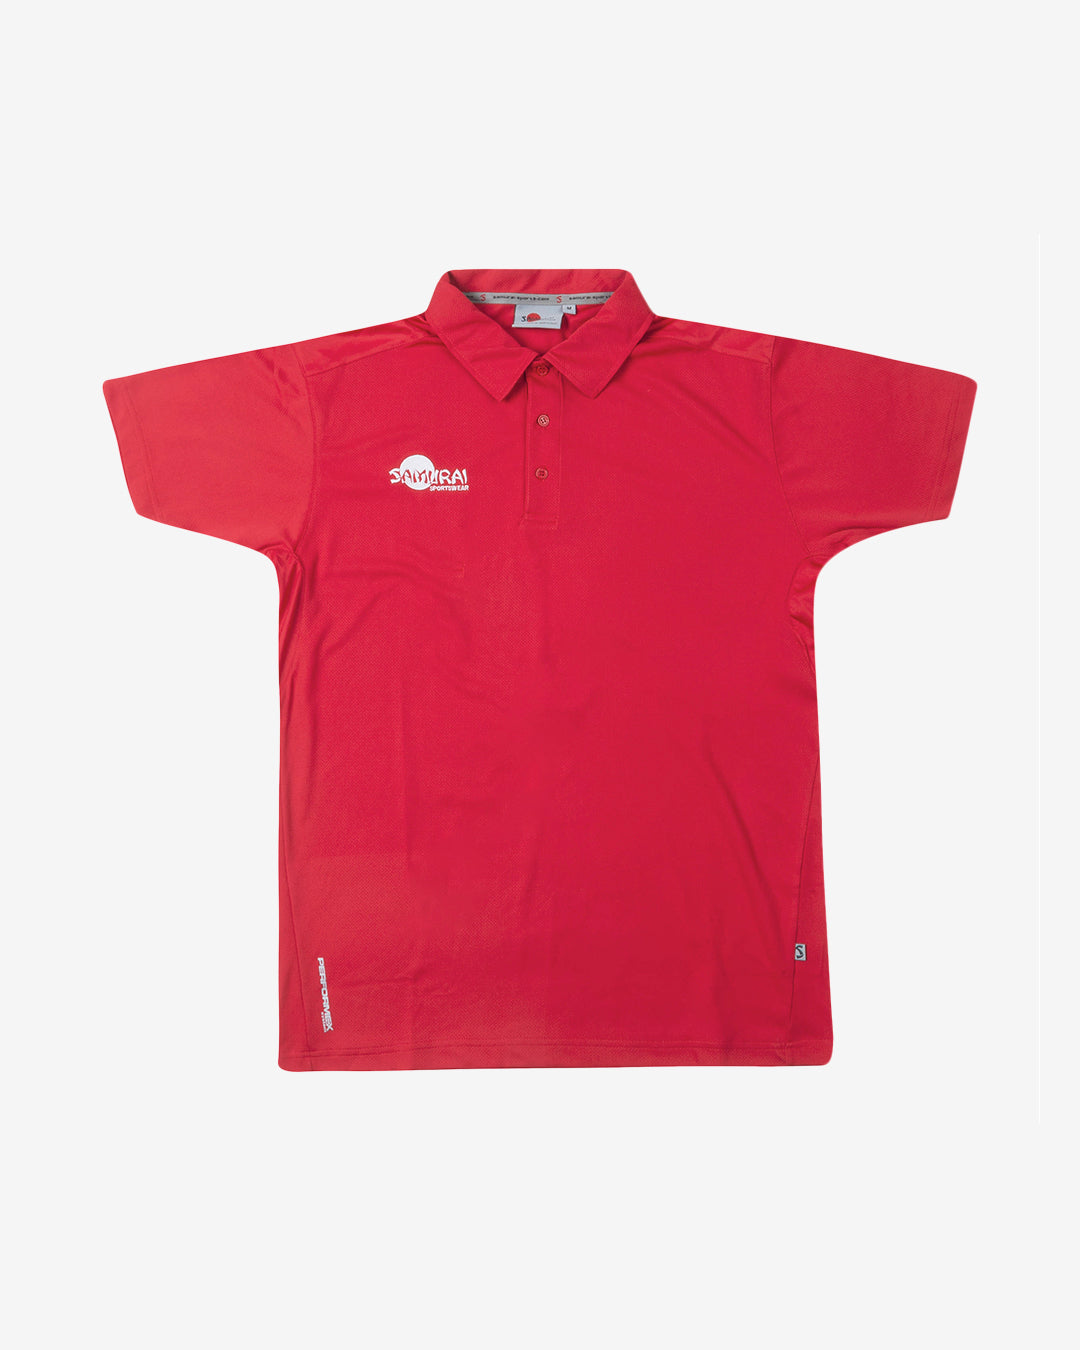 Hc: 9602 - Performance Polo - Red